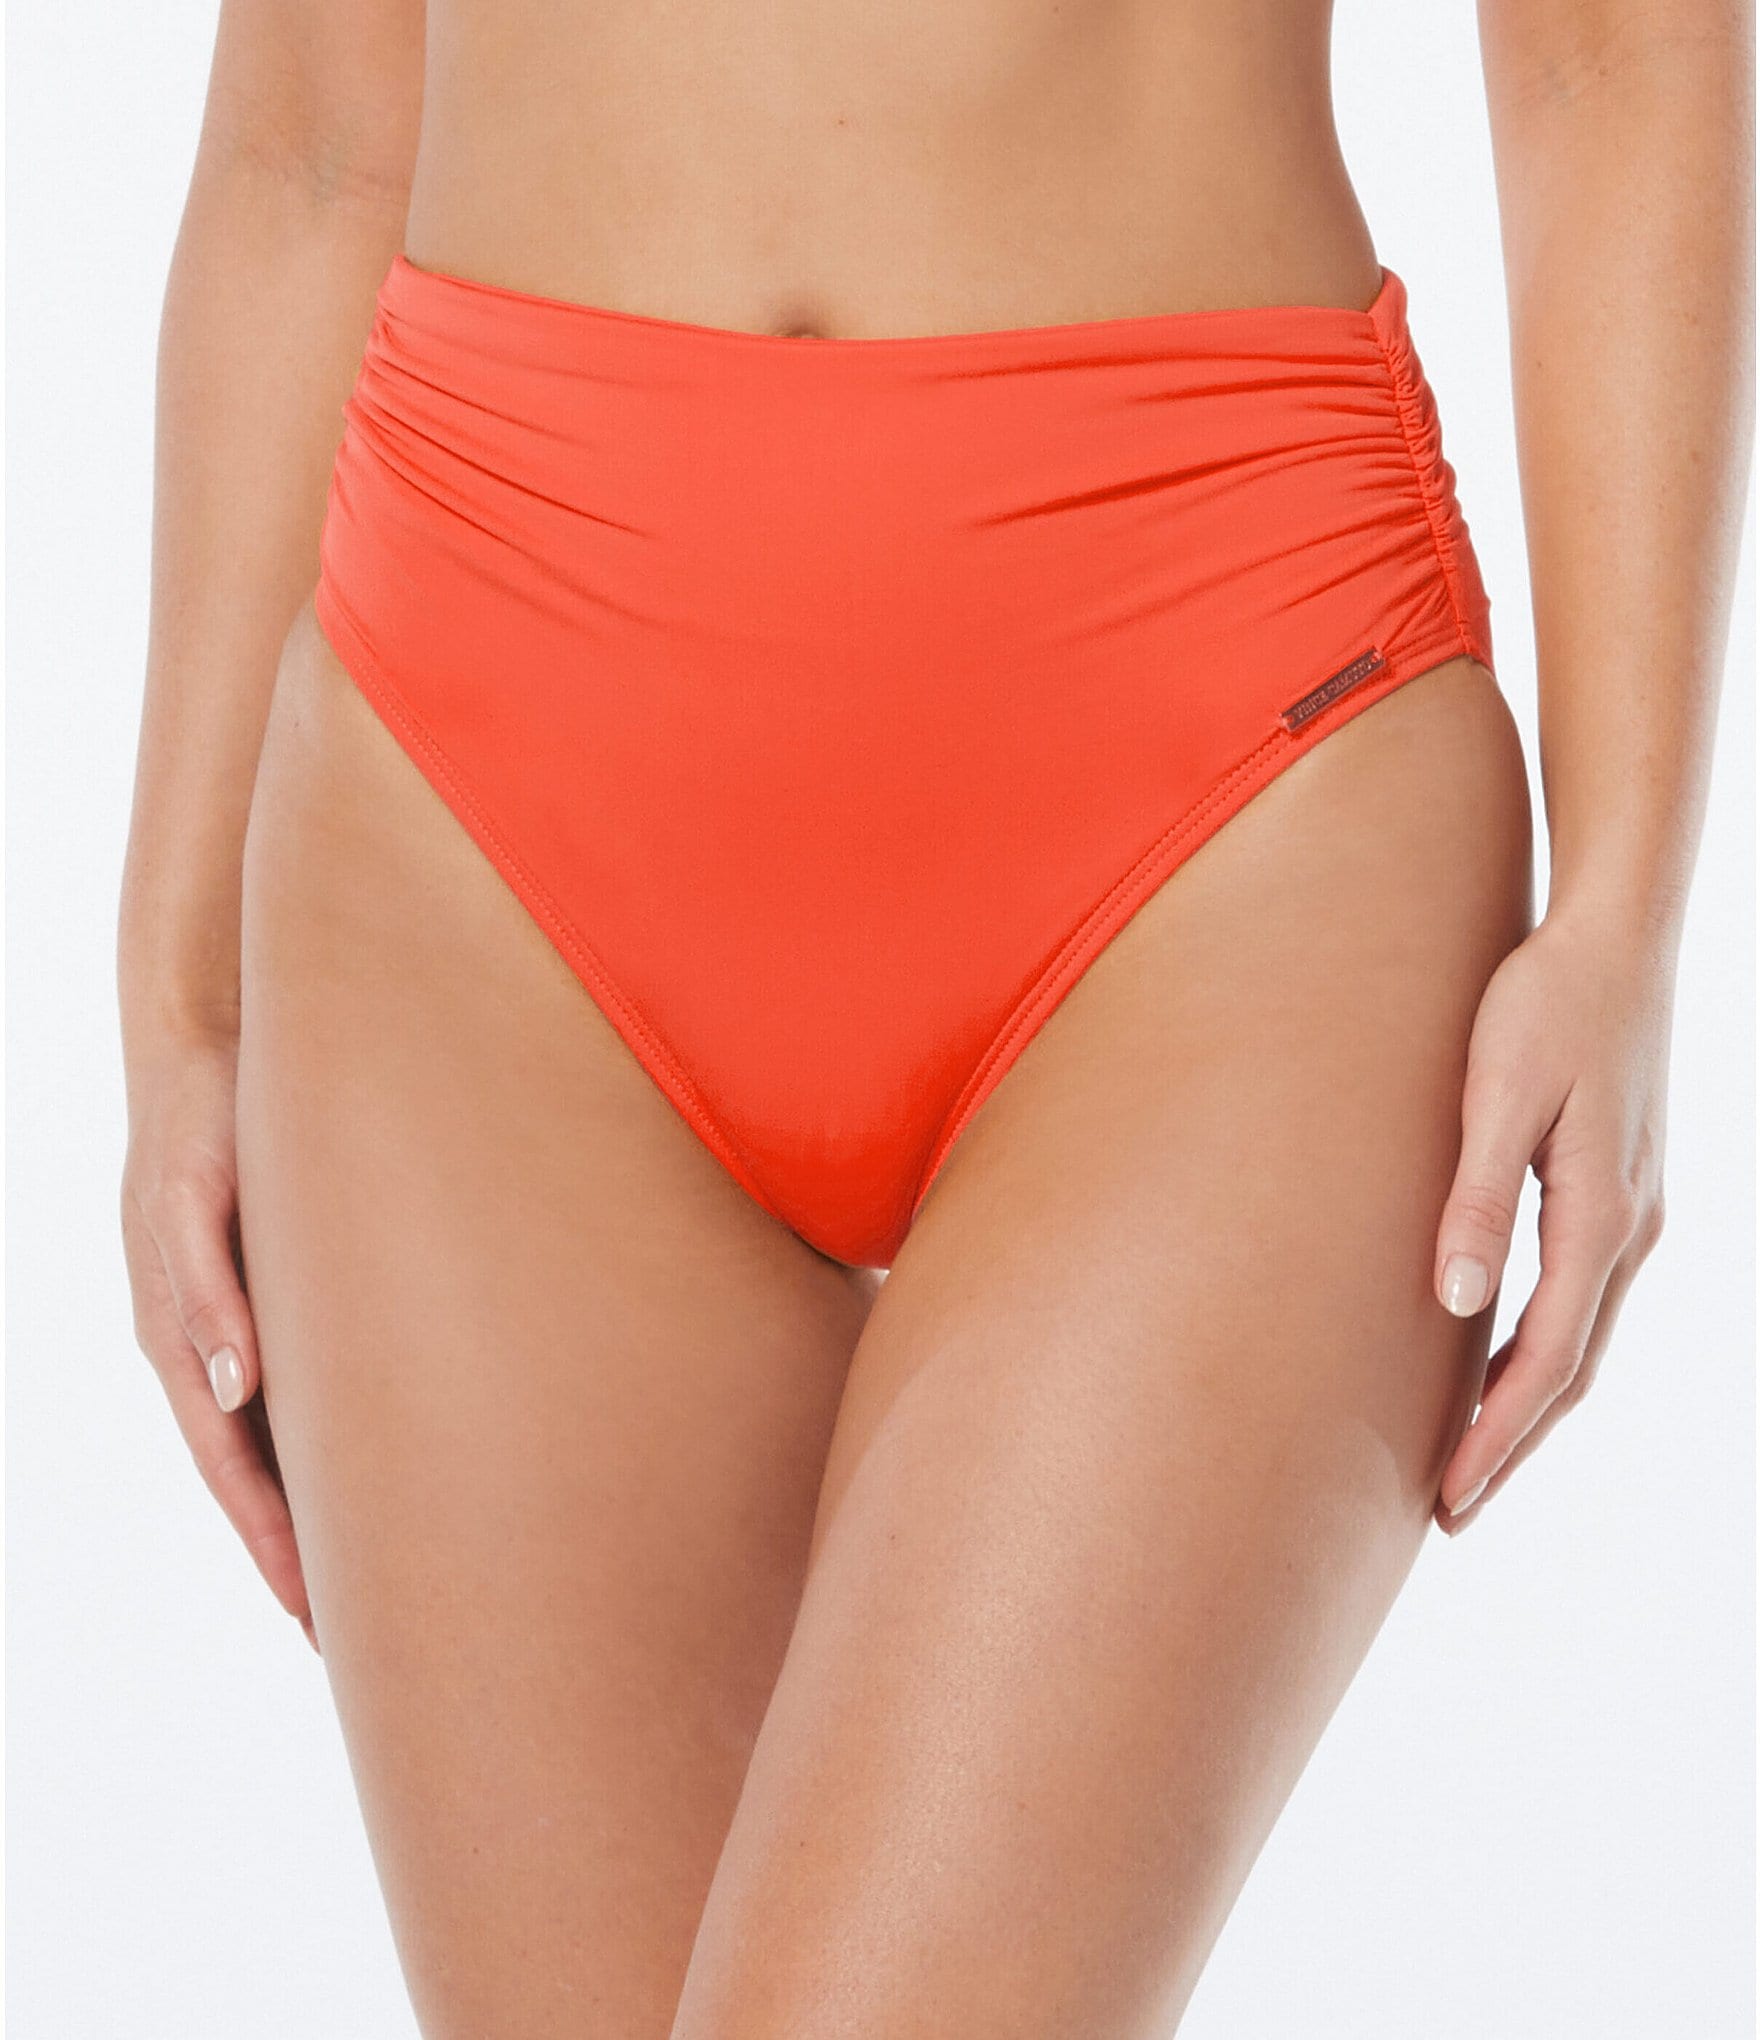 Vince Camuto, Other, Vince Camuto Underwear